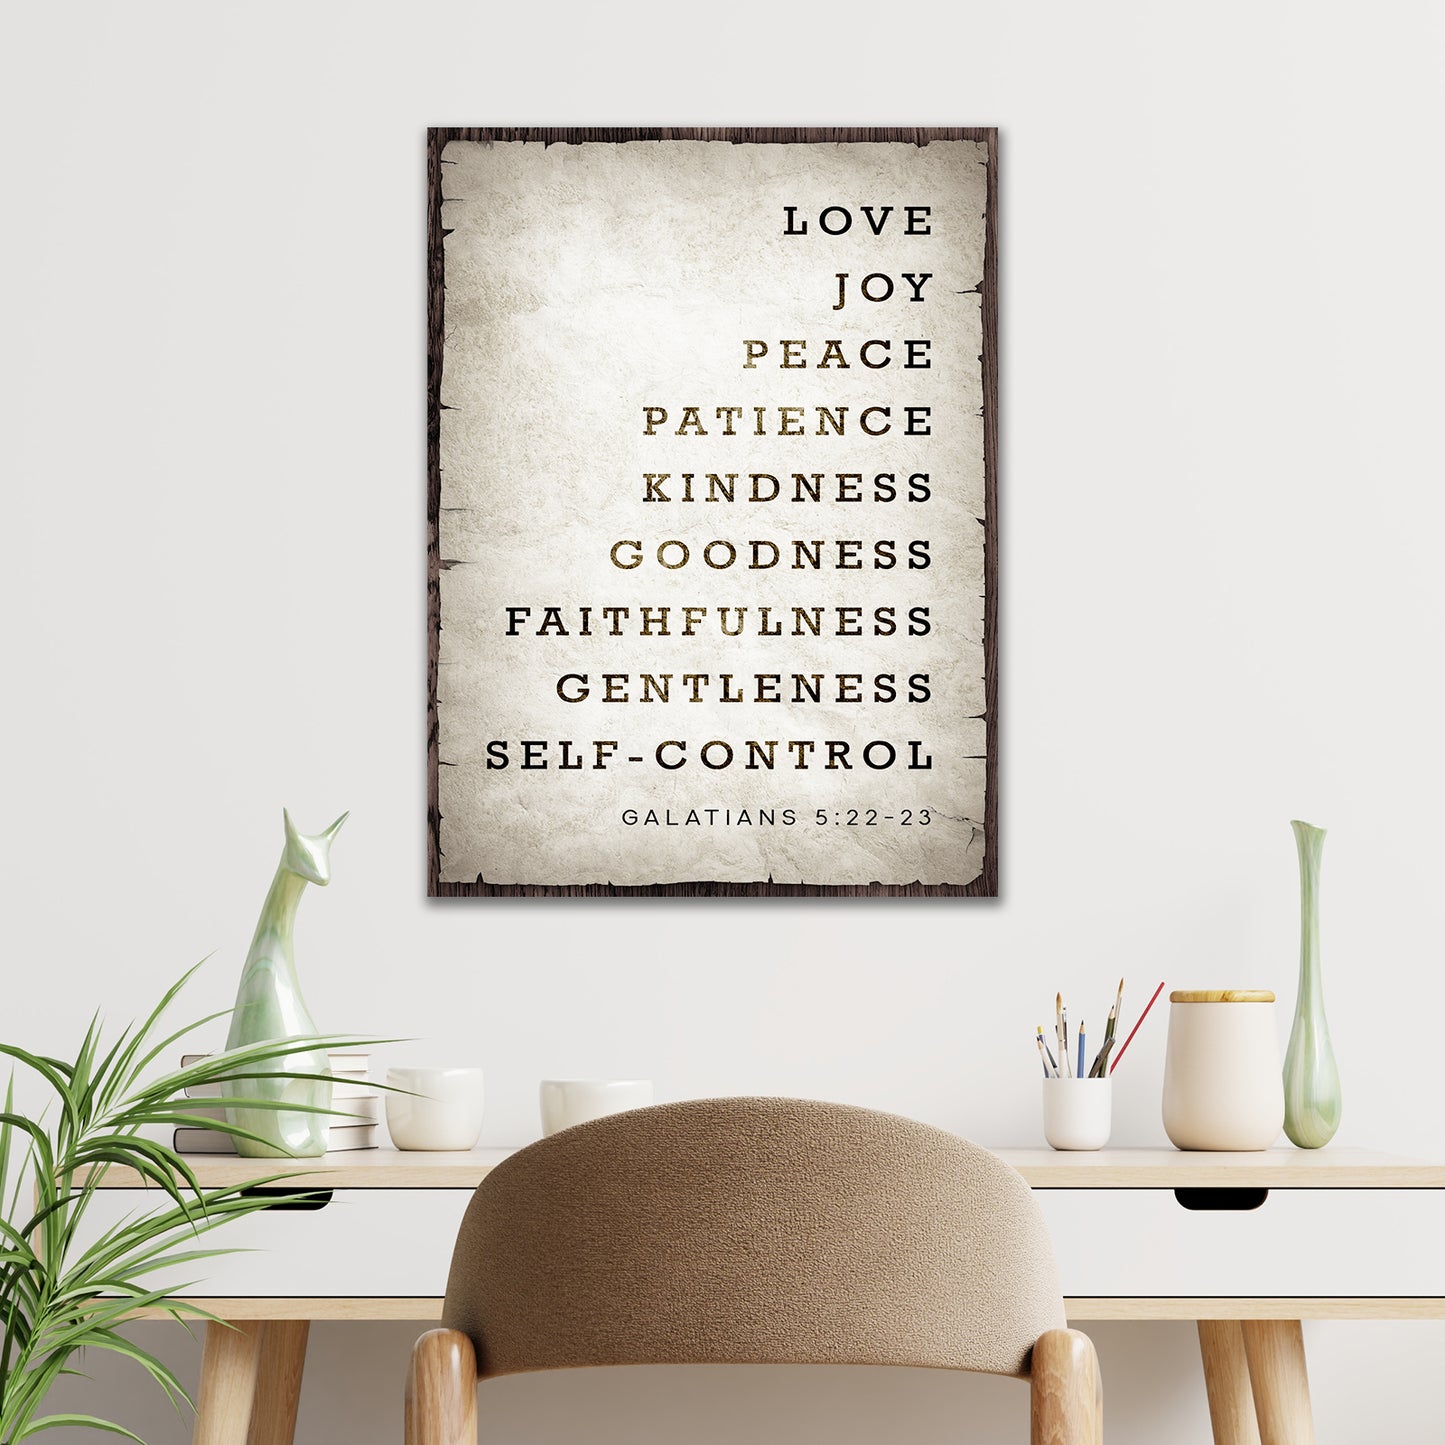 Galatians 5:22-23 Scripture Sign - Image by Tailored Canvases